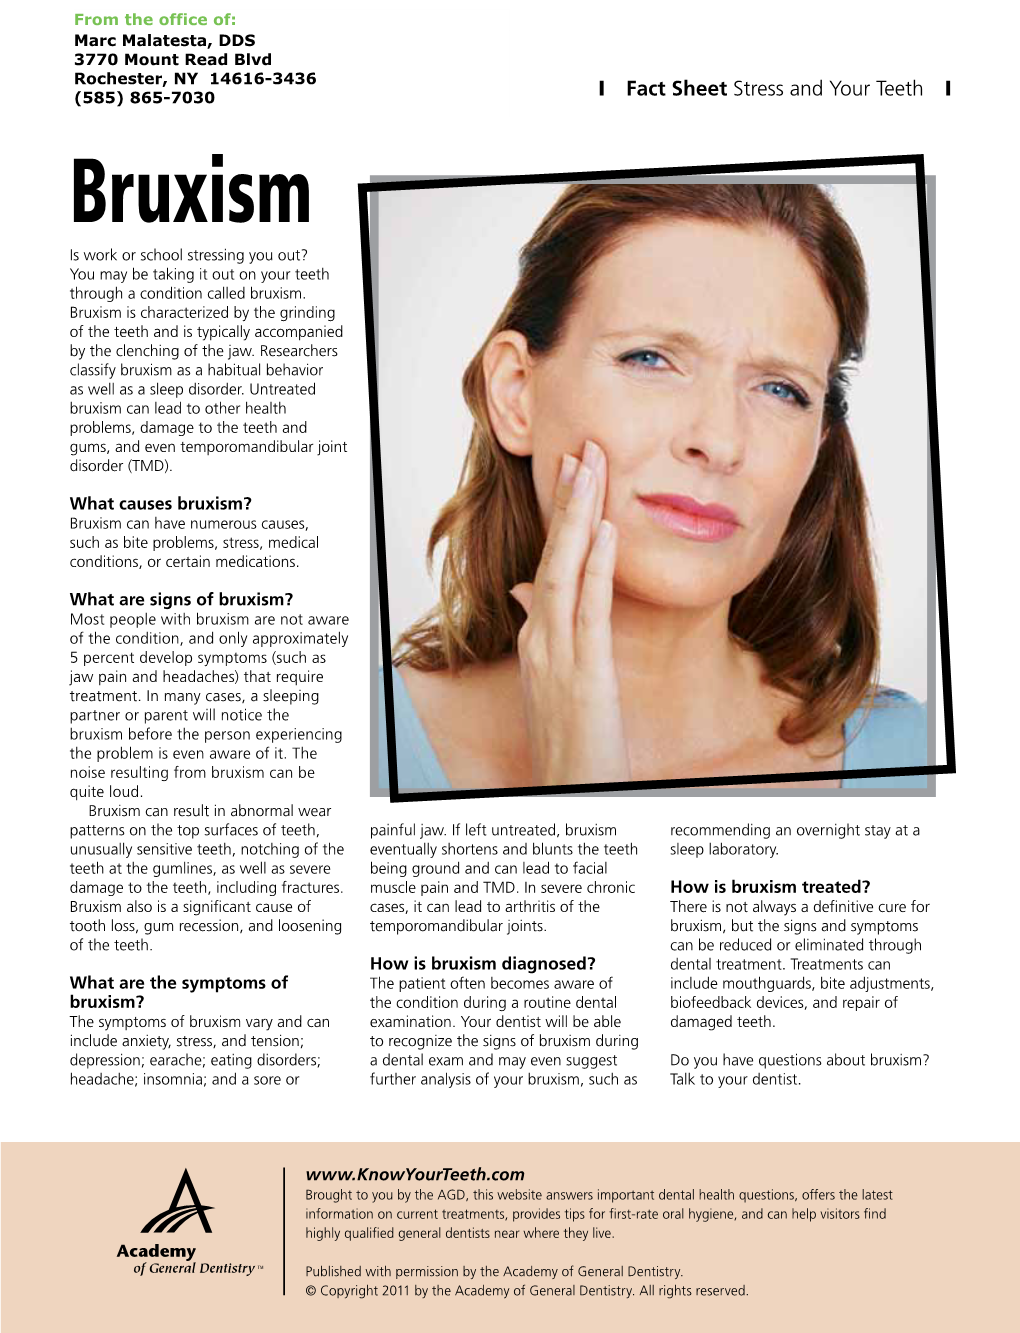 Bruxism Is Work Or School Stressing You Out? You May Be Taking It out on Your Teeth Through a Condition Called Bruxism